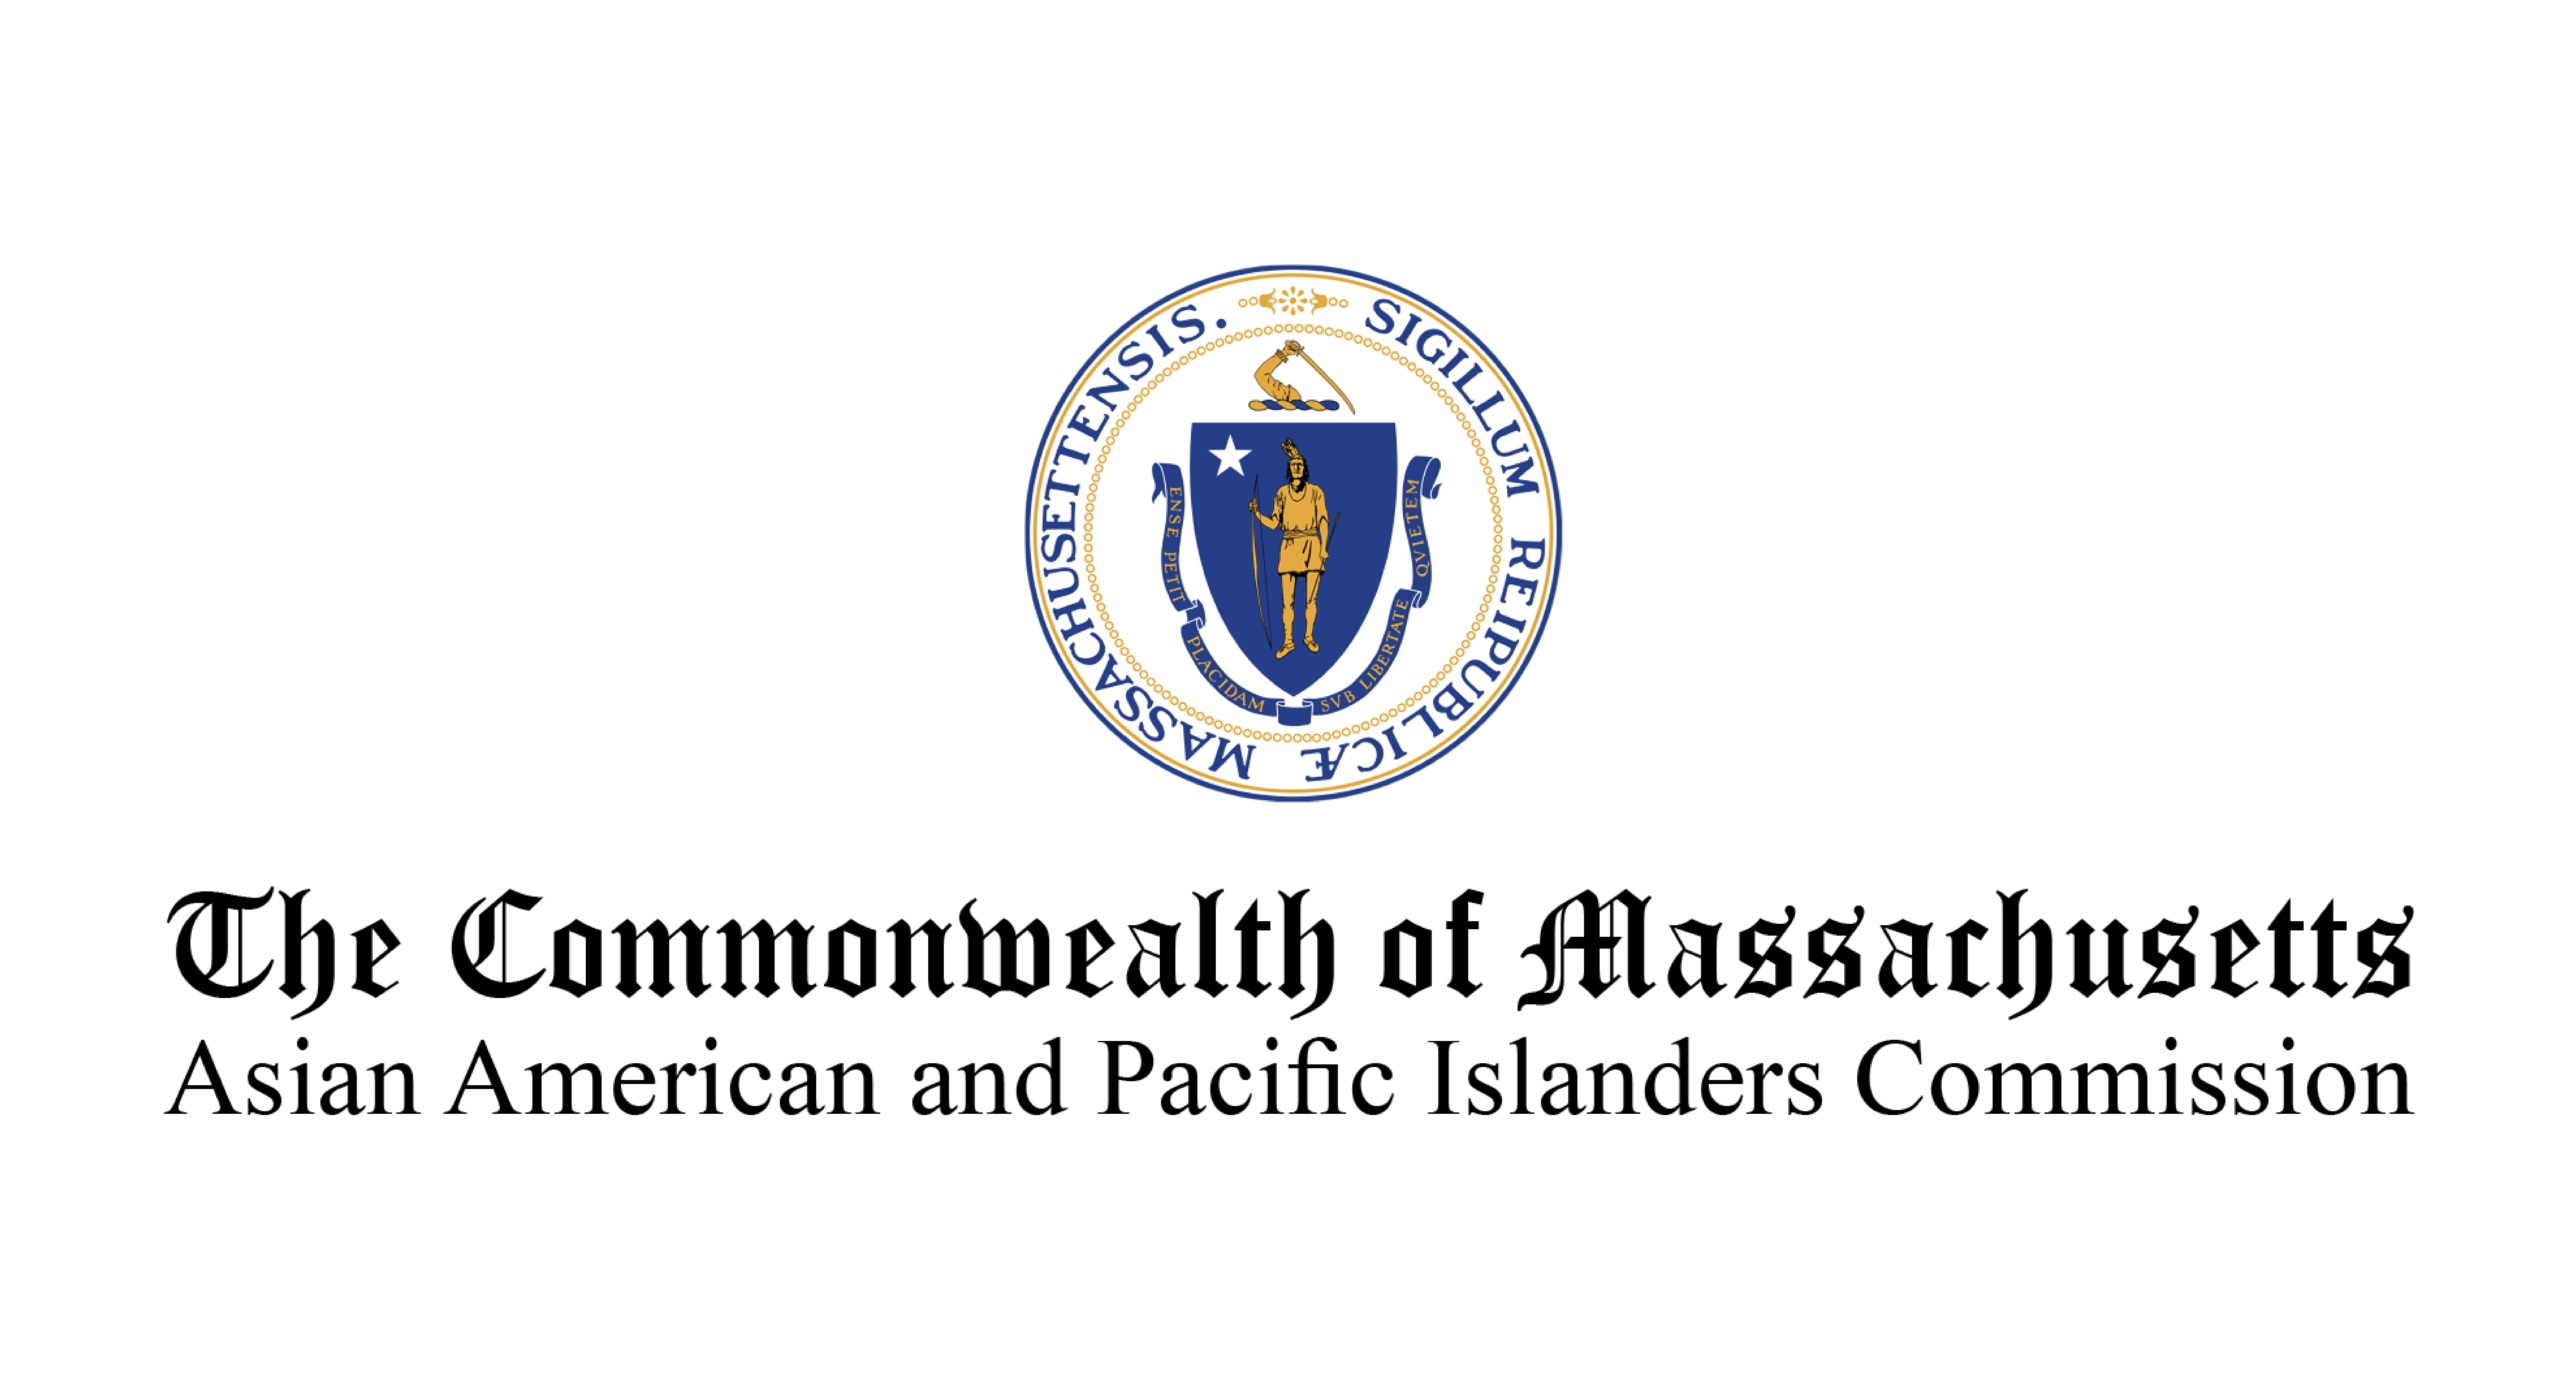 The Massachusetts Asian American Commission Announces Name Change